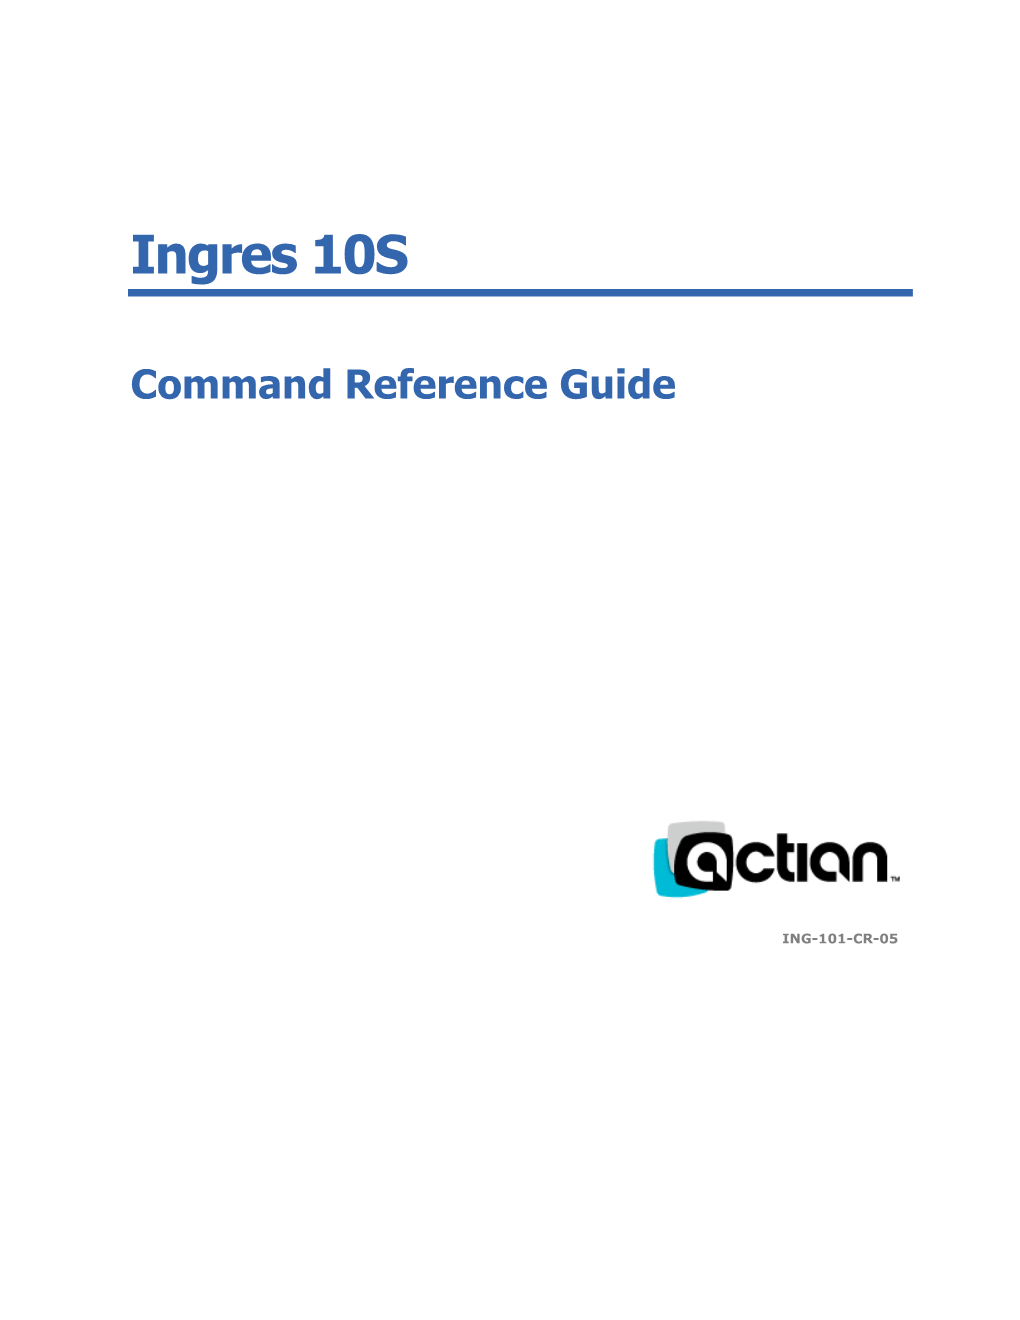 Ingres 10.1 Command Reference Guide